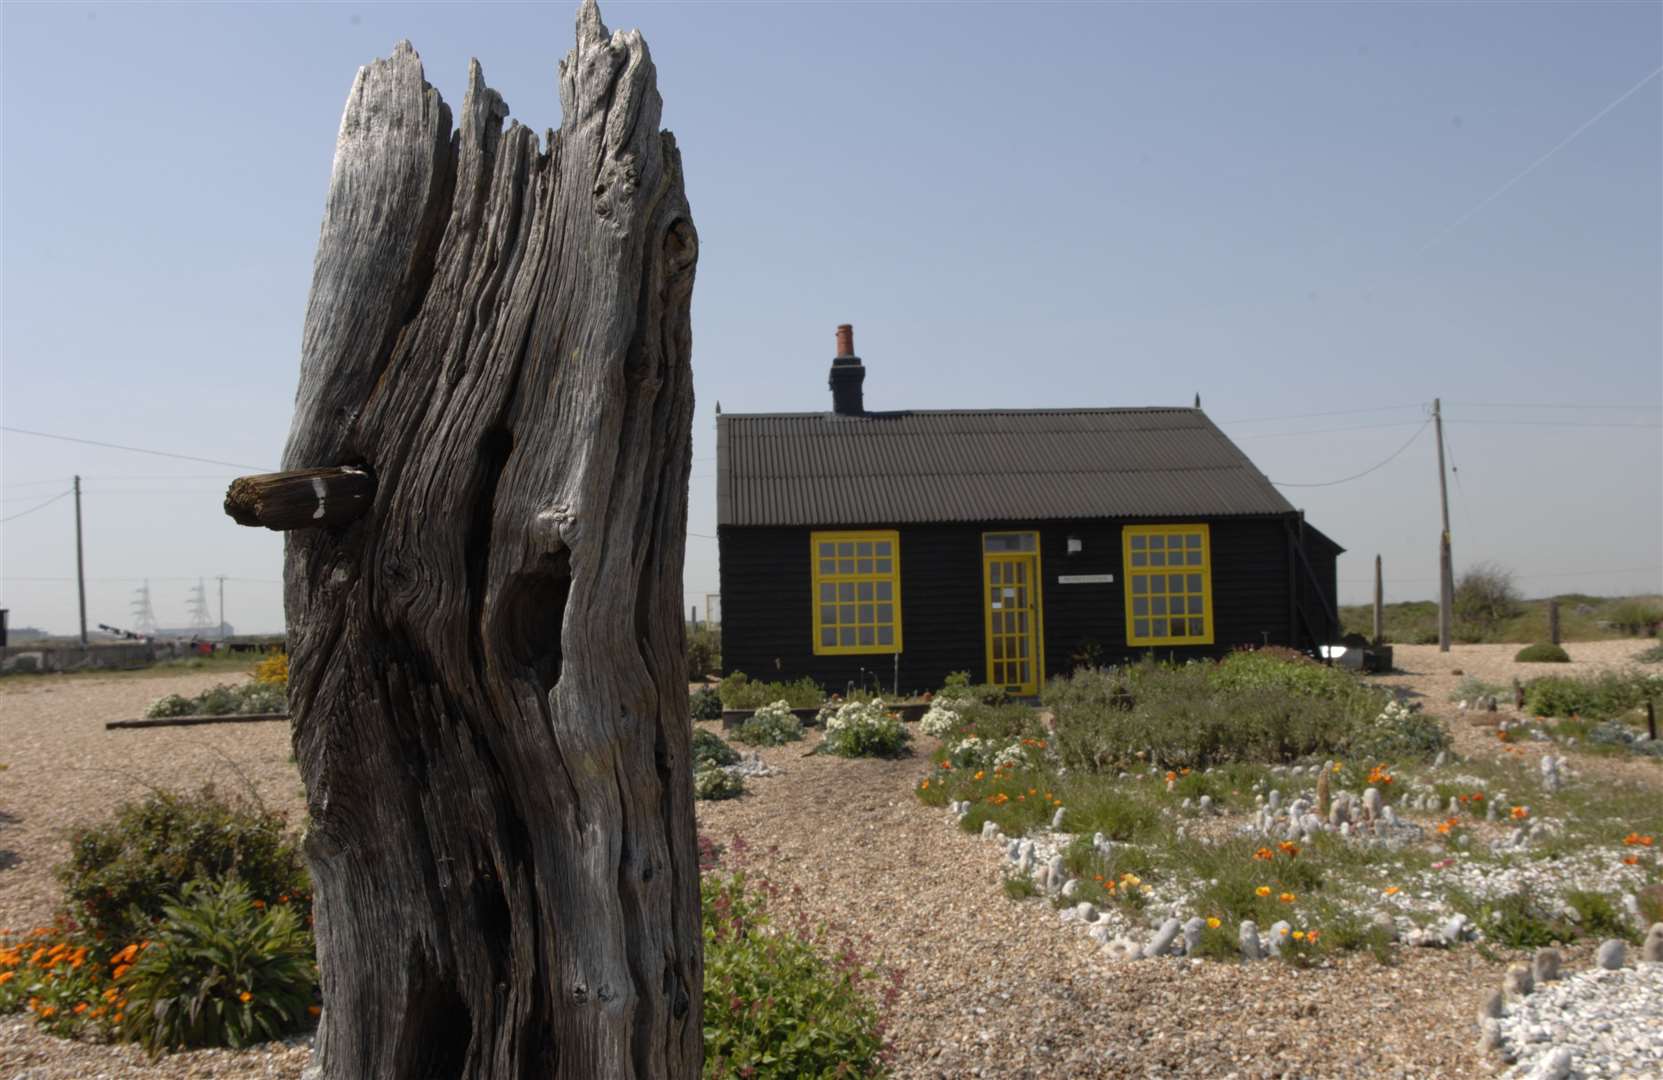 Even Dungeness has seen revived interest courtesy of arts and culture - helped in no small part by interest in Derek Jarman’s Prospect Cottage. Picture: Gary Browne